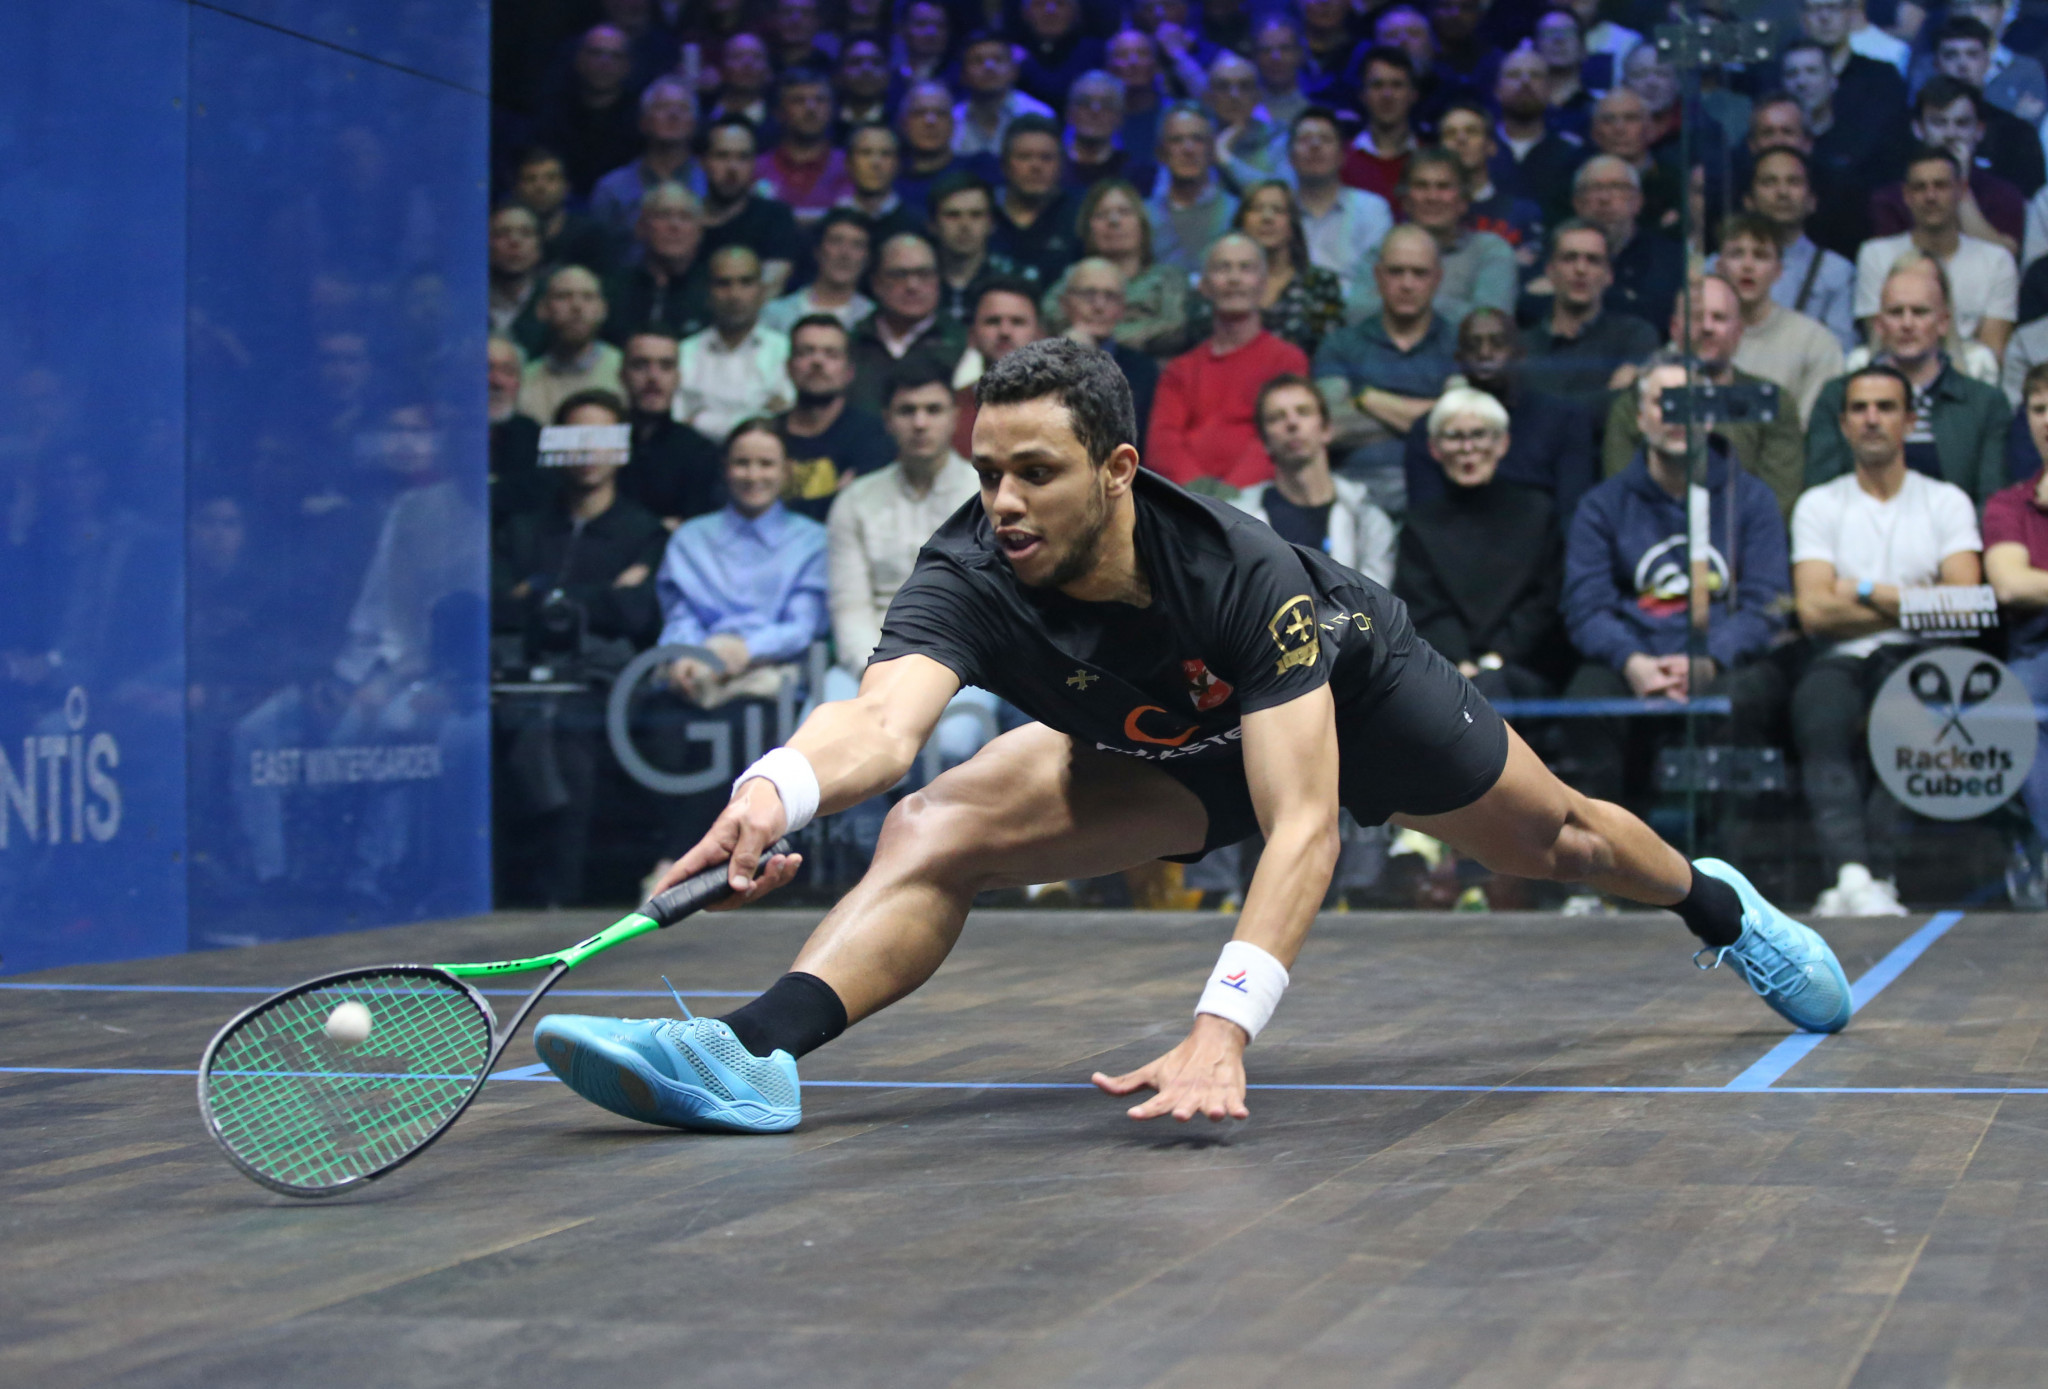 Egypt's Mostafa Asal is hoping for the perfect birthday present by winning the PSA World Championships but is set to face tough opposition from countryman Ali Farag, chasing a fourth title ©PSA